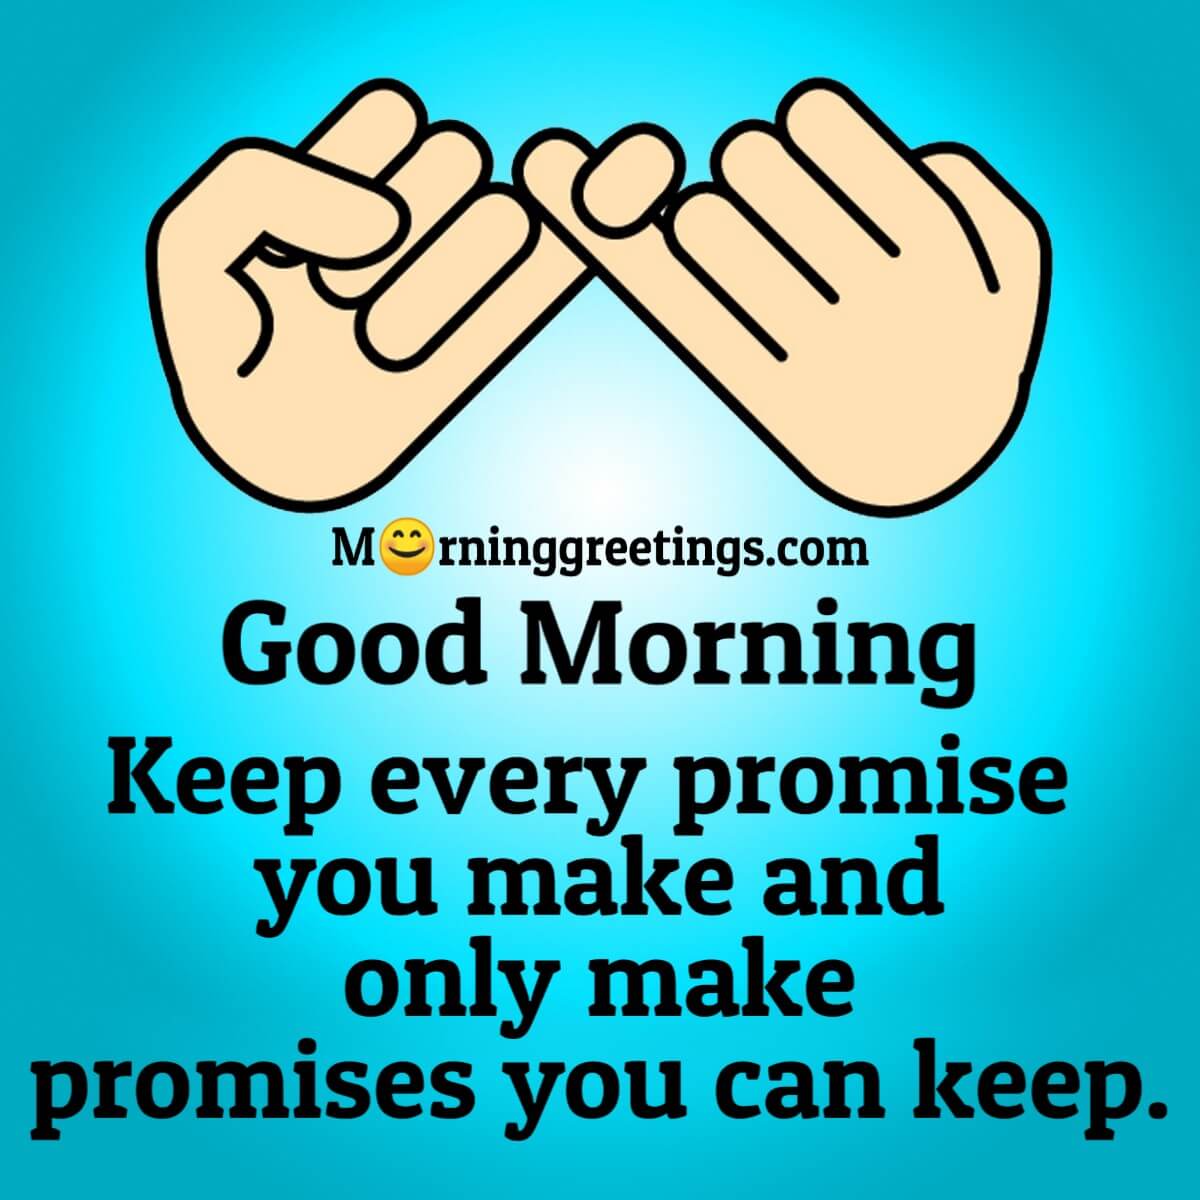 Good Morning Keep Every Promise